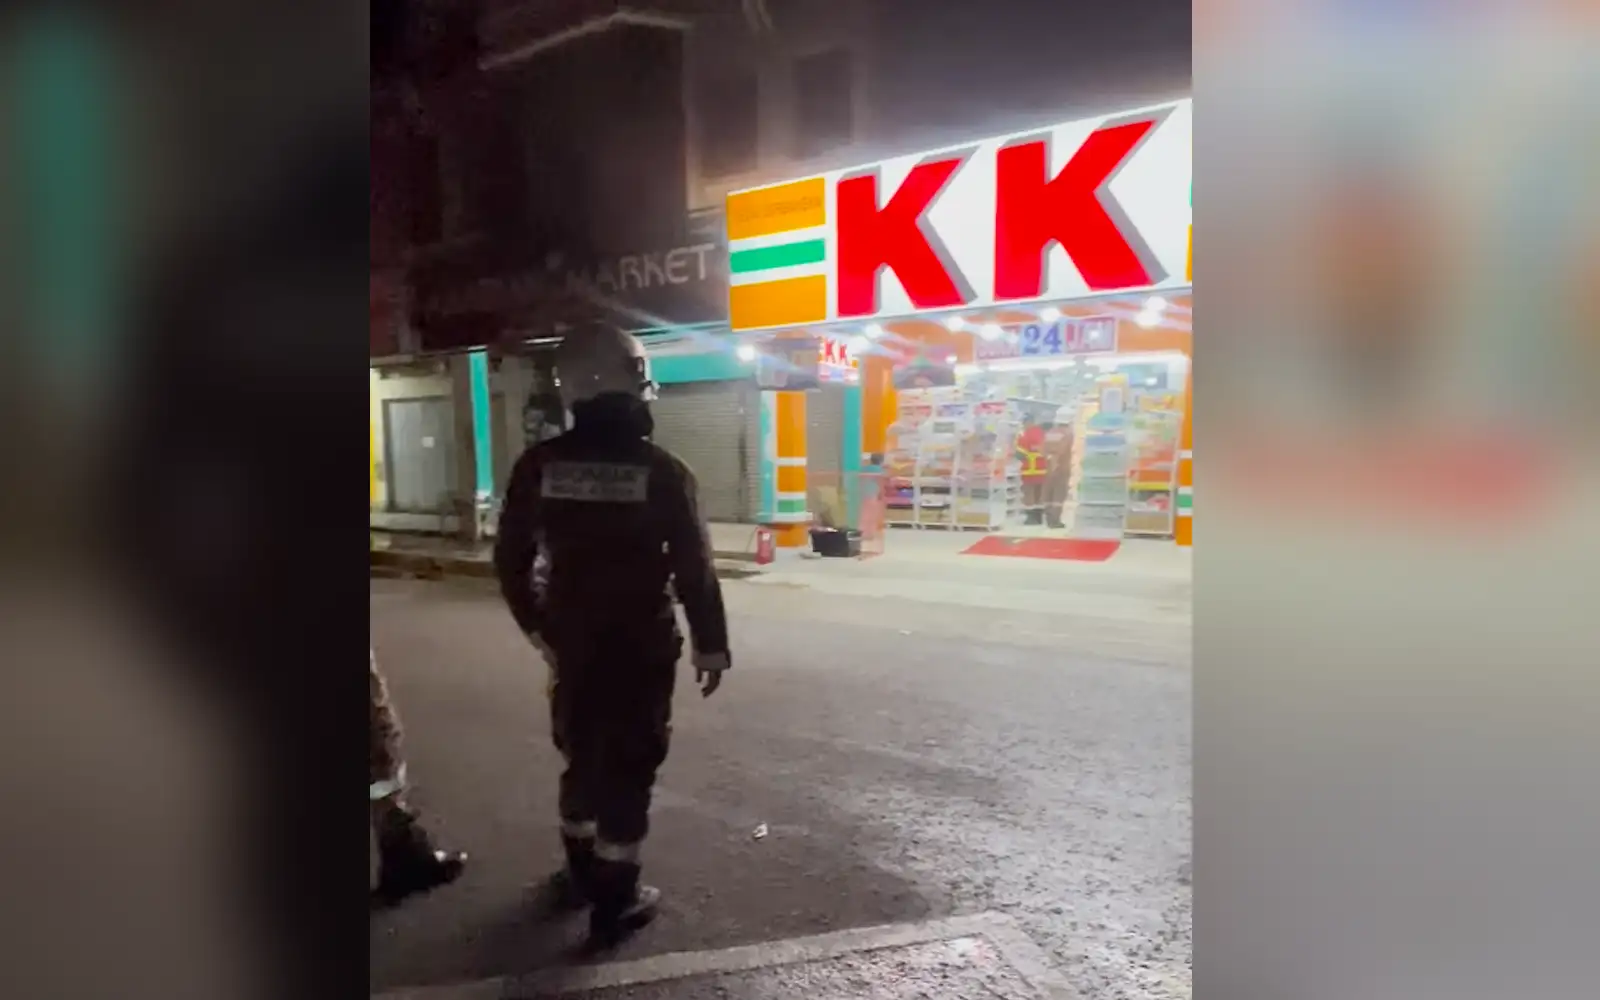 another kk mart outlet firebombed, this time in kuantan